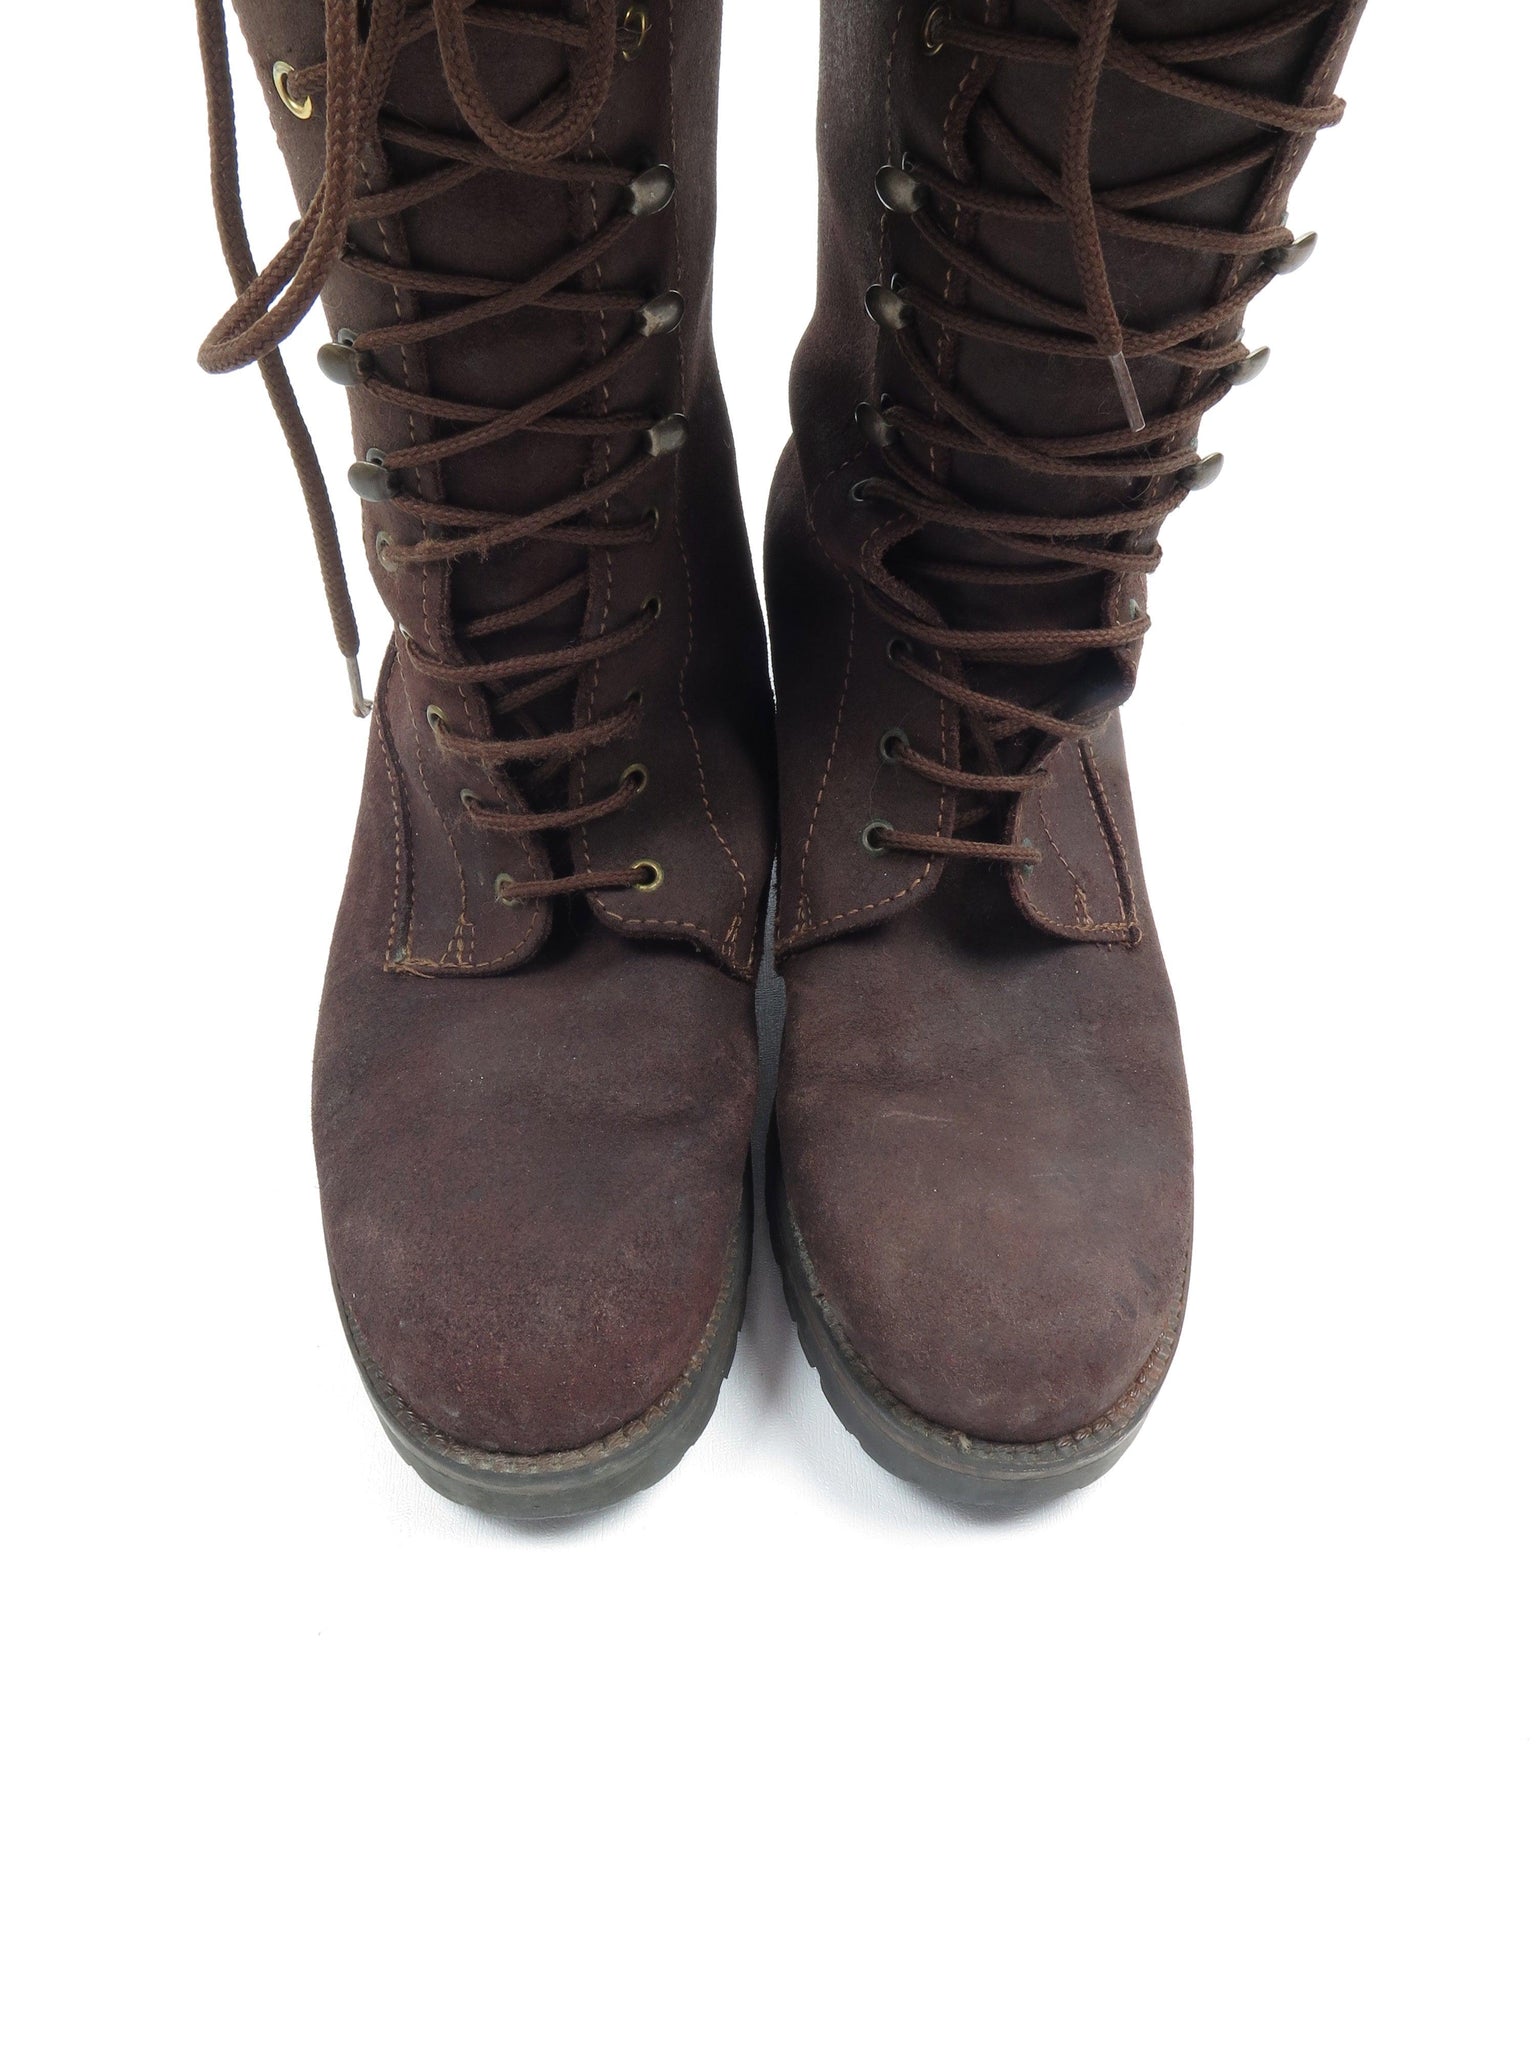 Brown Suede Long  Lace Up Boots 38/5 - The Harlequin